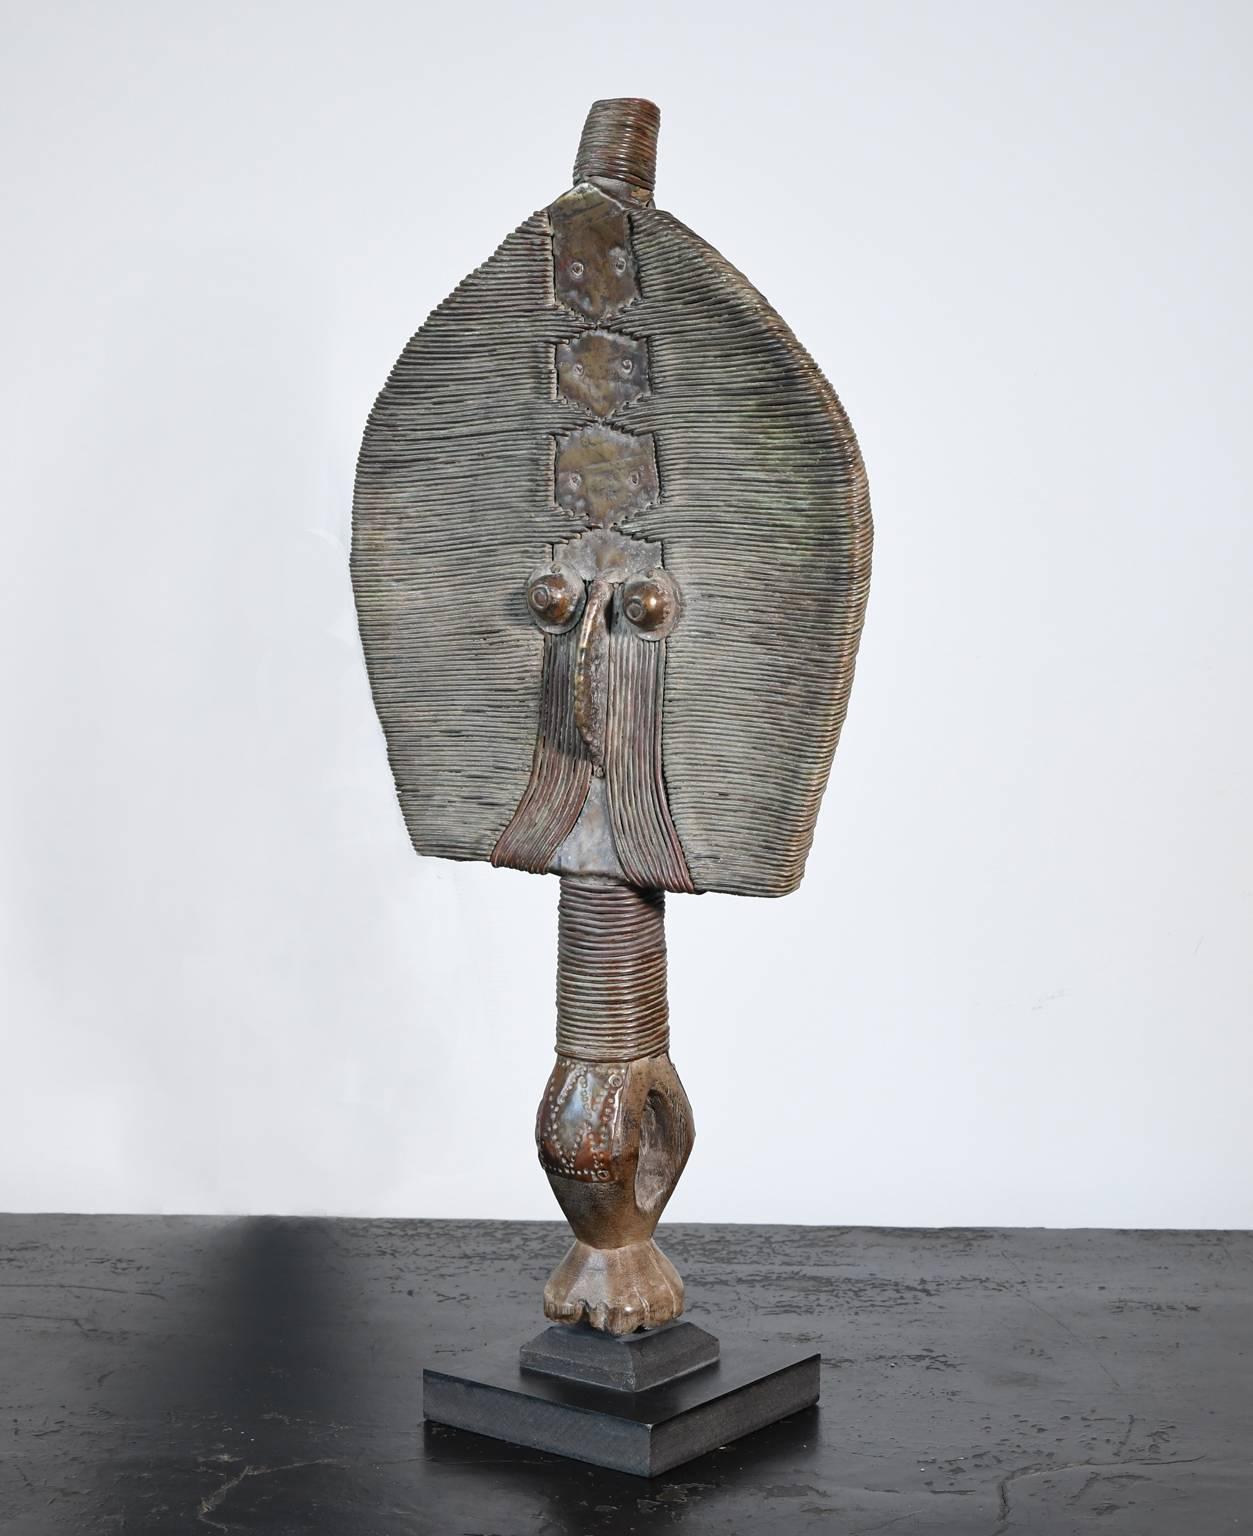 Traditional Bakota reliquary Guardian figure from the Kota People (Mahongwe Tribe), Gabon Africa probably dates from the early 20th century or is possibly older. It is difficult to ascribe a specific date to these reliquary masks. However,